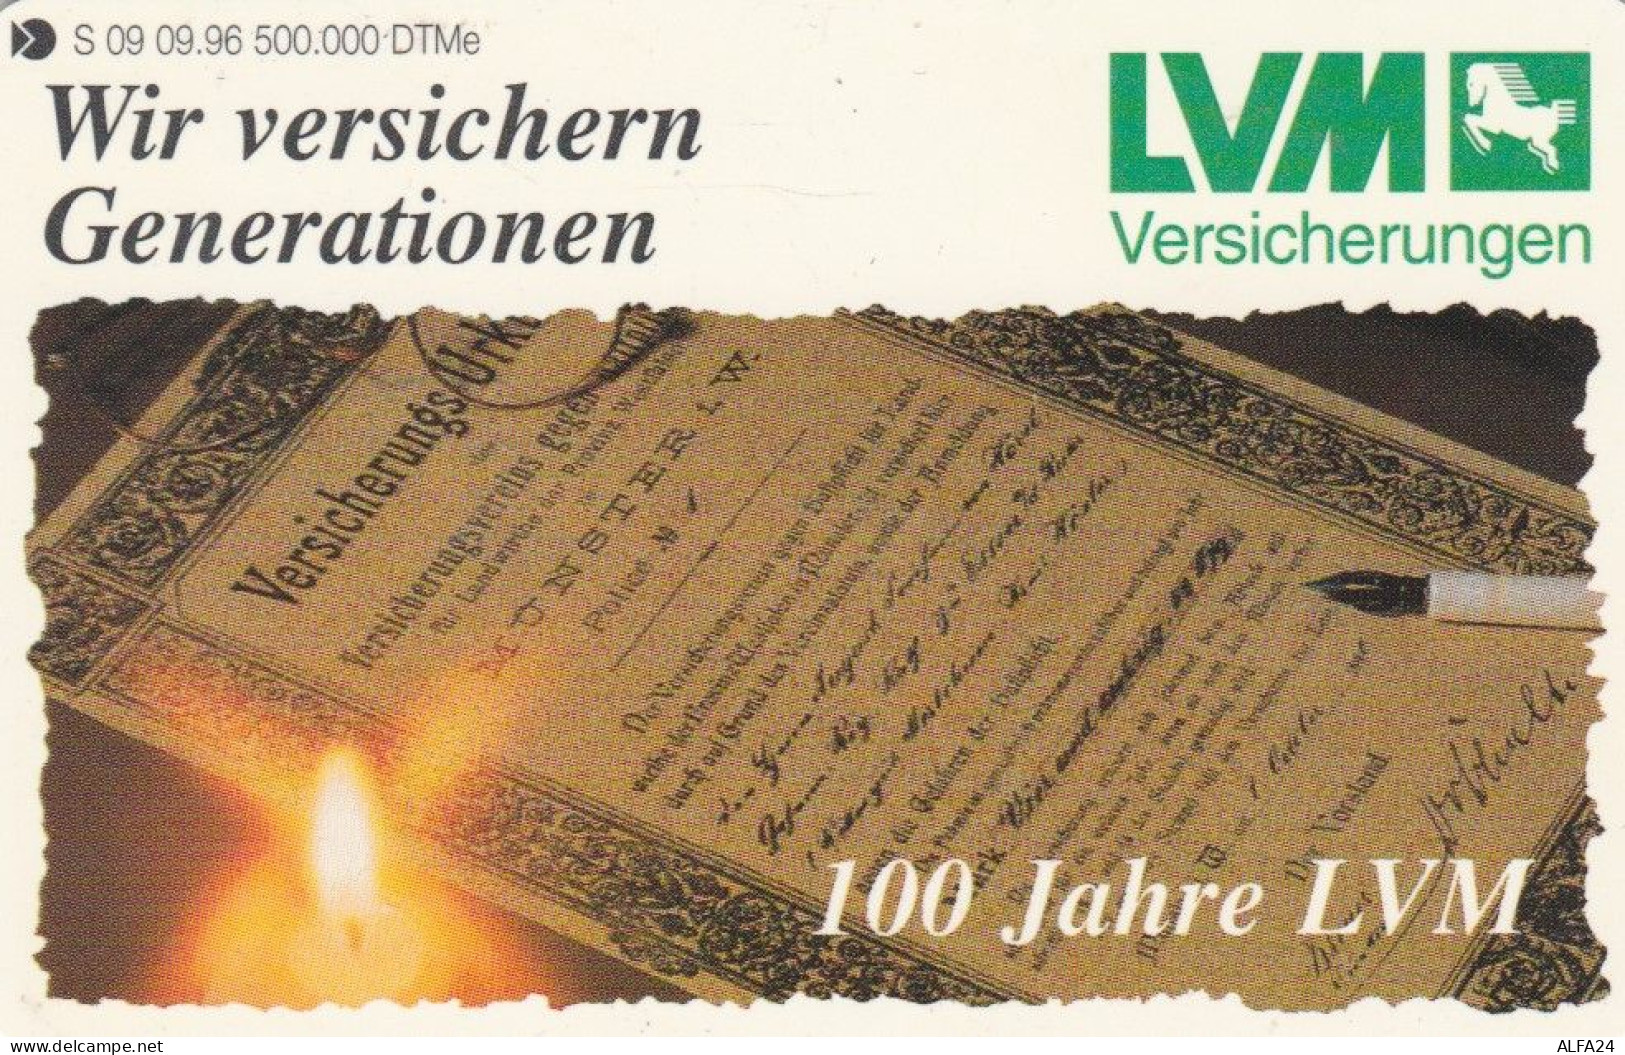 PHONE CARD GERMANIA SERIE S (E69.29.6 - S-Series : Tills With Third Part Ads